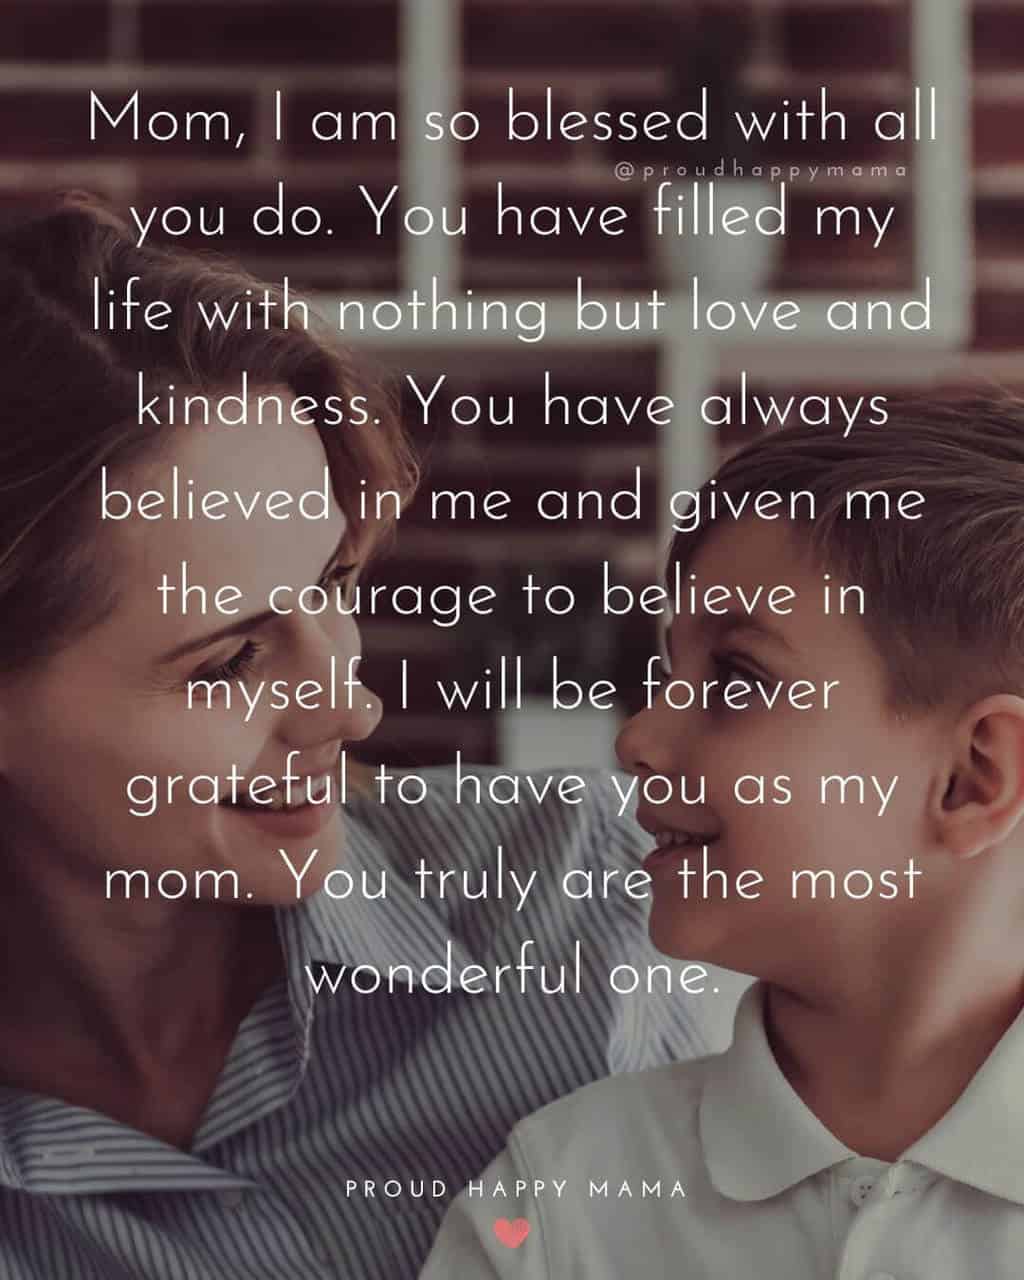 Mothers Day Captions | Mom, I am so blessed with all you do. You have filled my life with nothing but love and kindness. You have always believed in me and given me the courage to believe in myself. I will be forever grateful to have you as my mom. You truly are the most wonderful one.